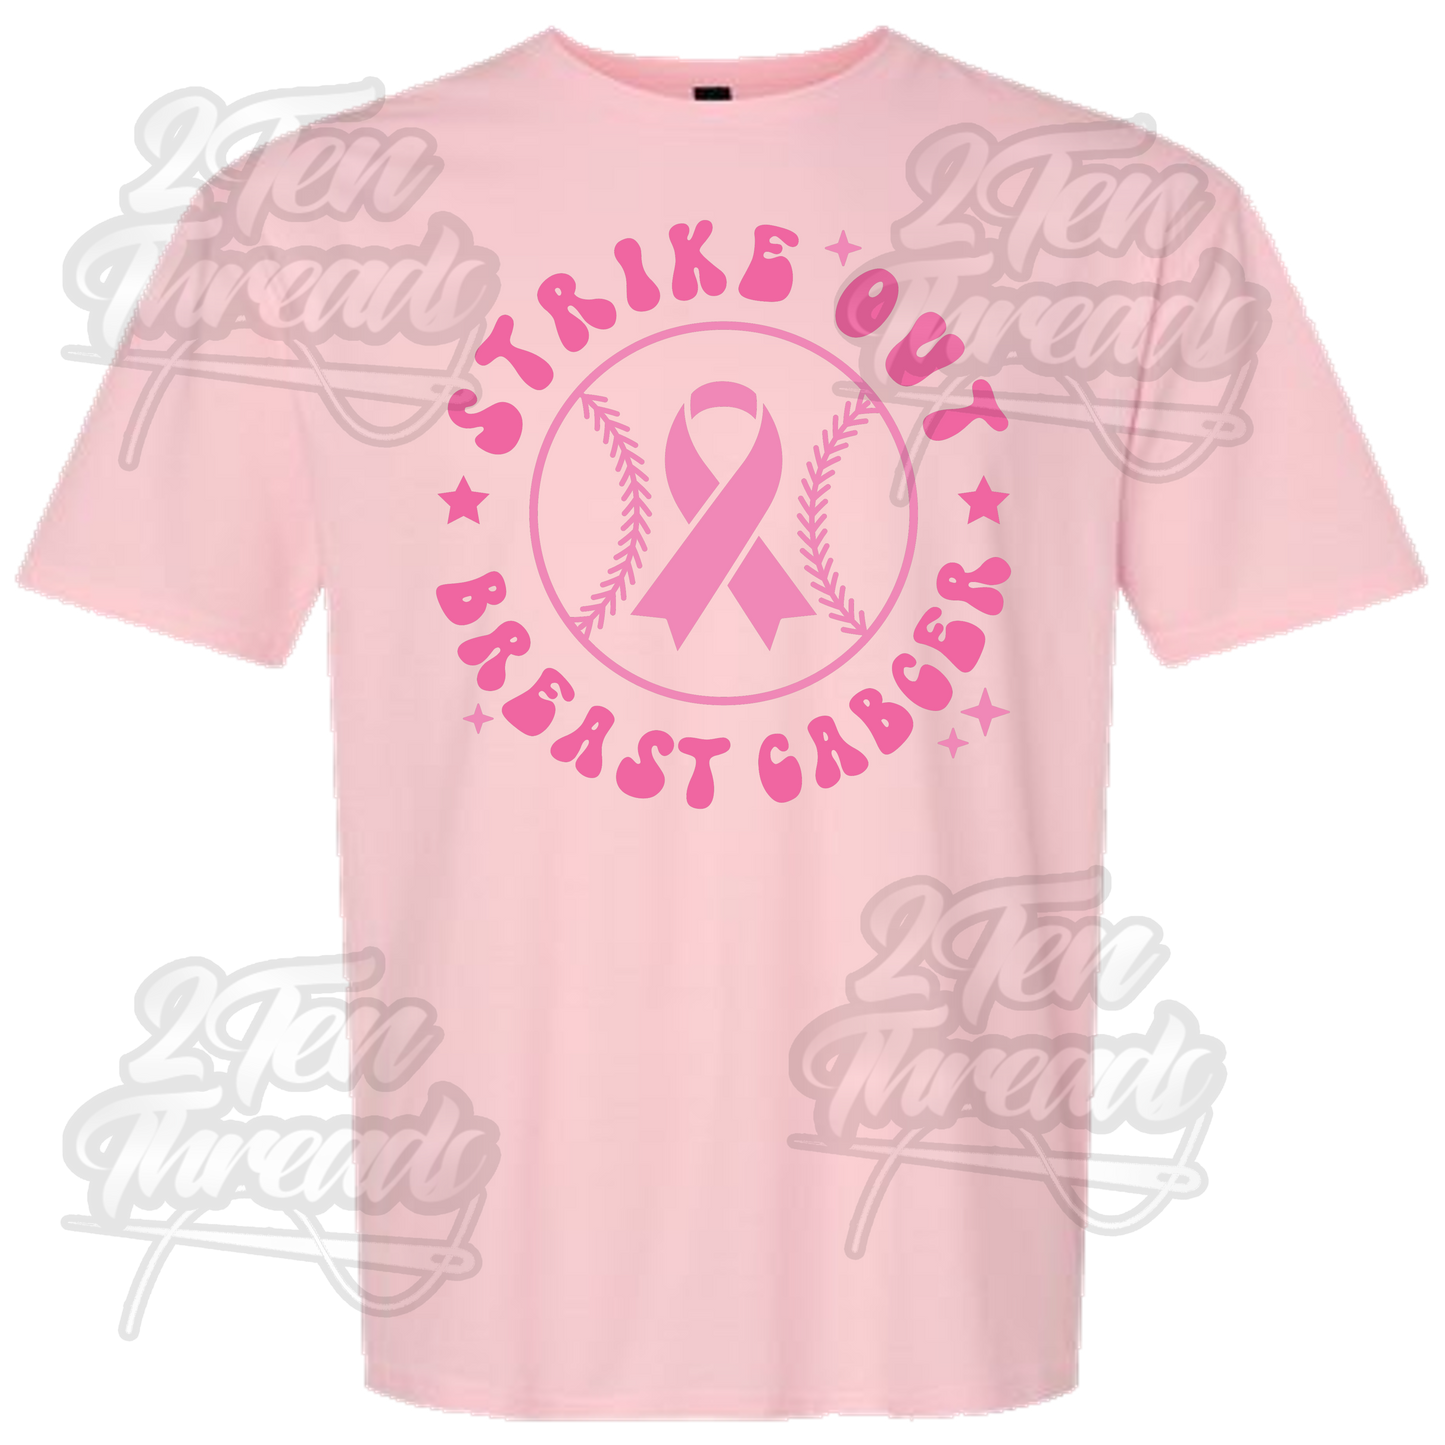 Strike out Breast Cancer Shirt